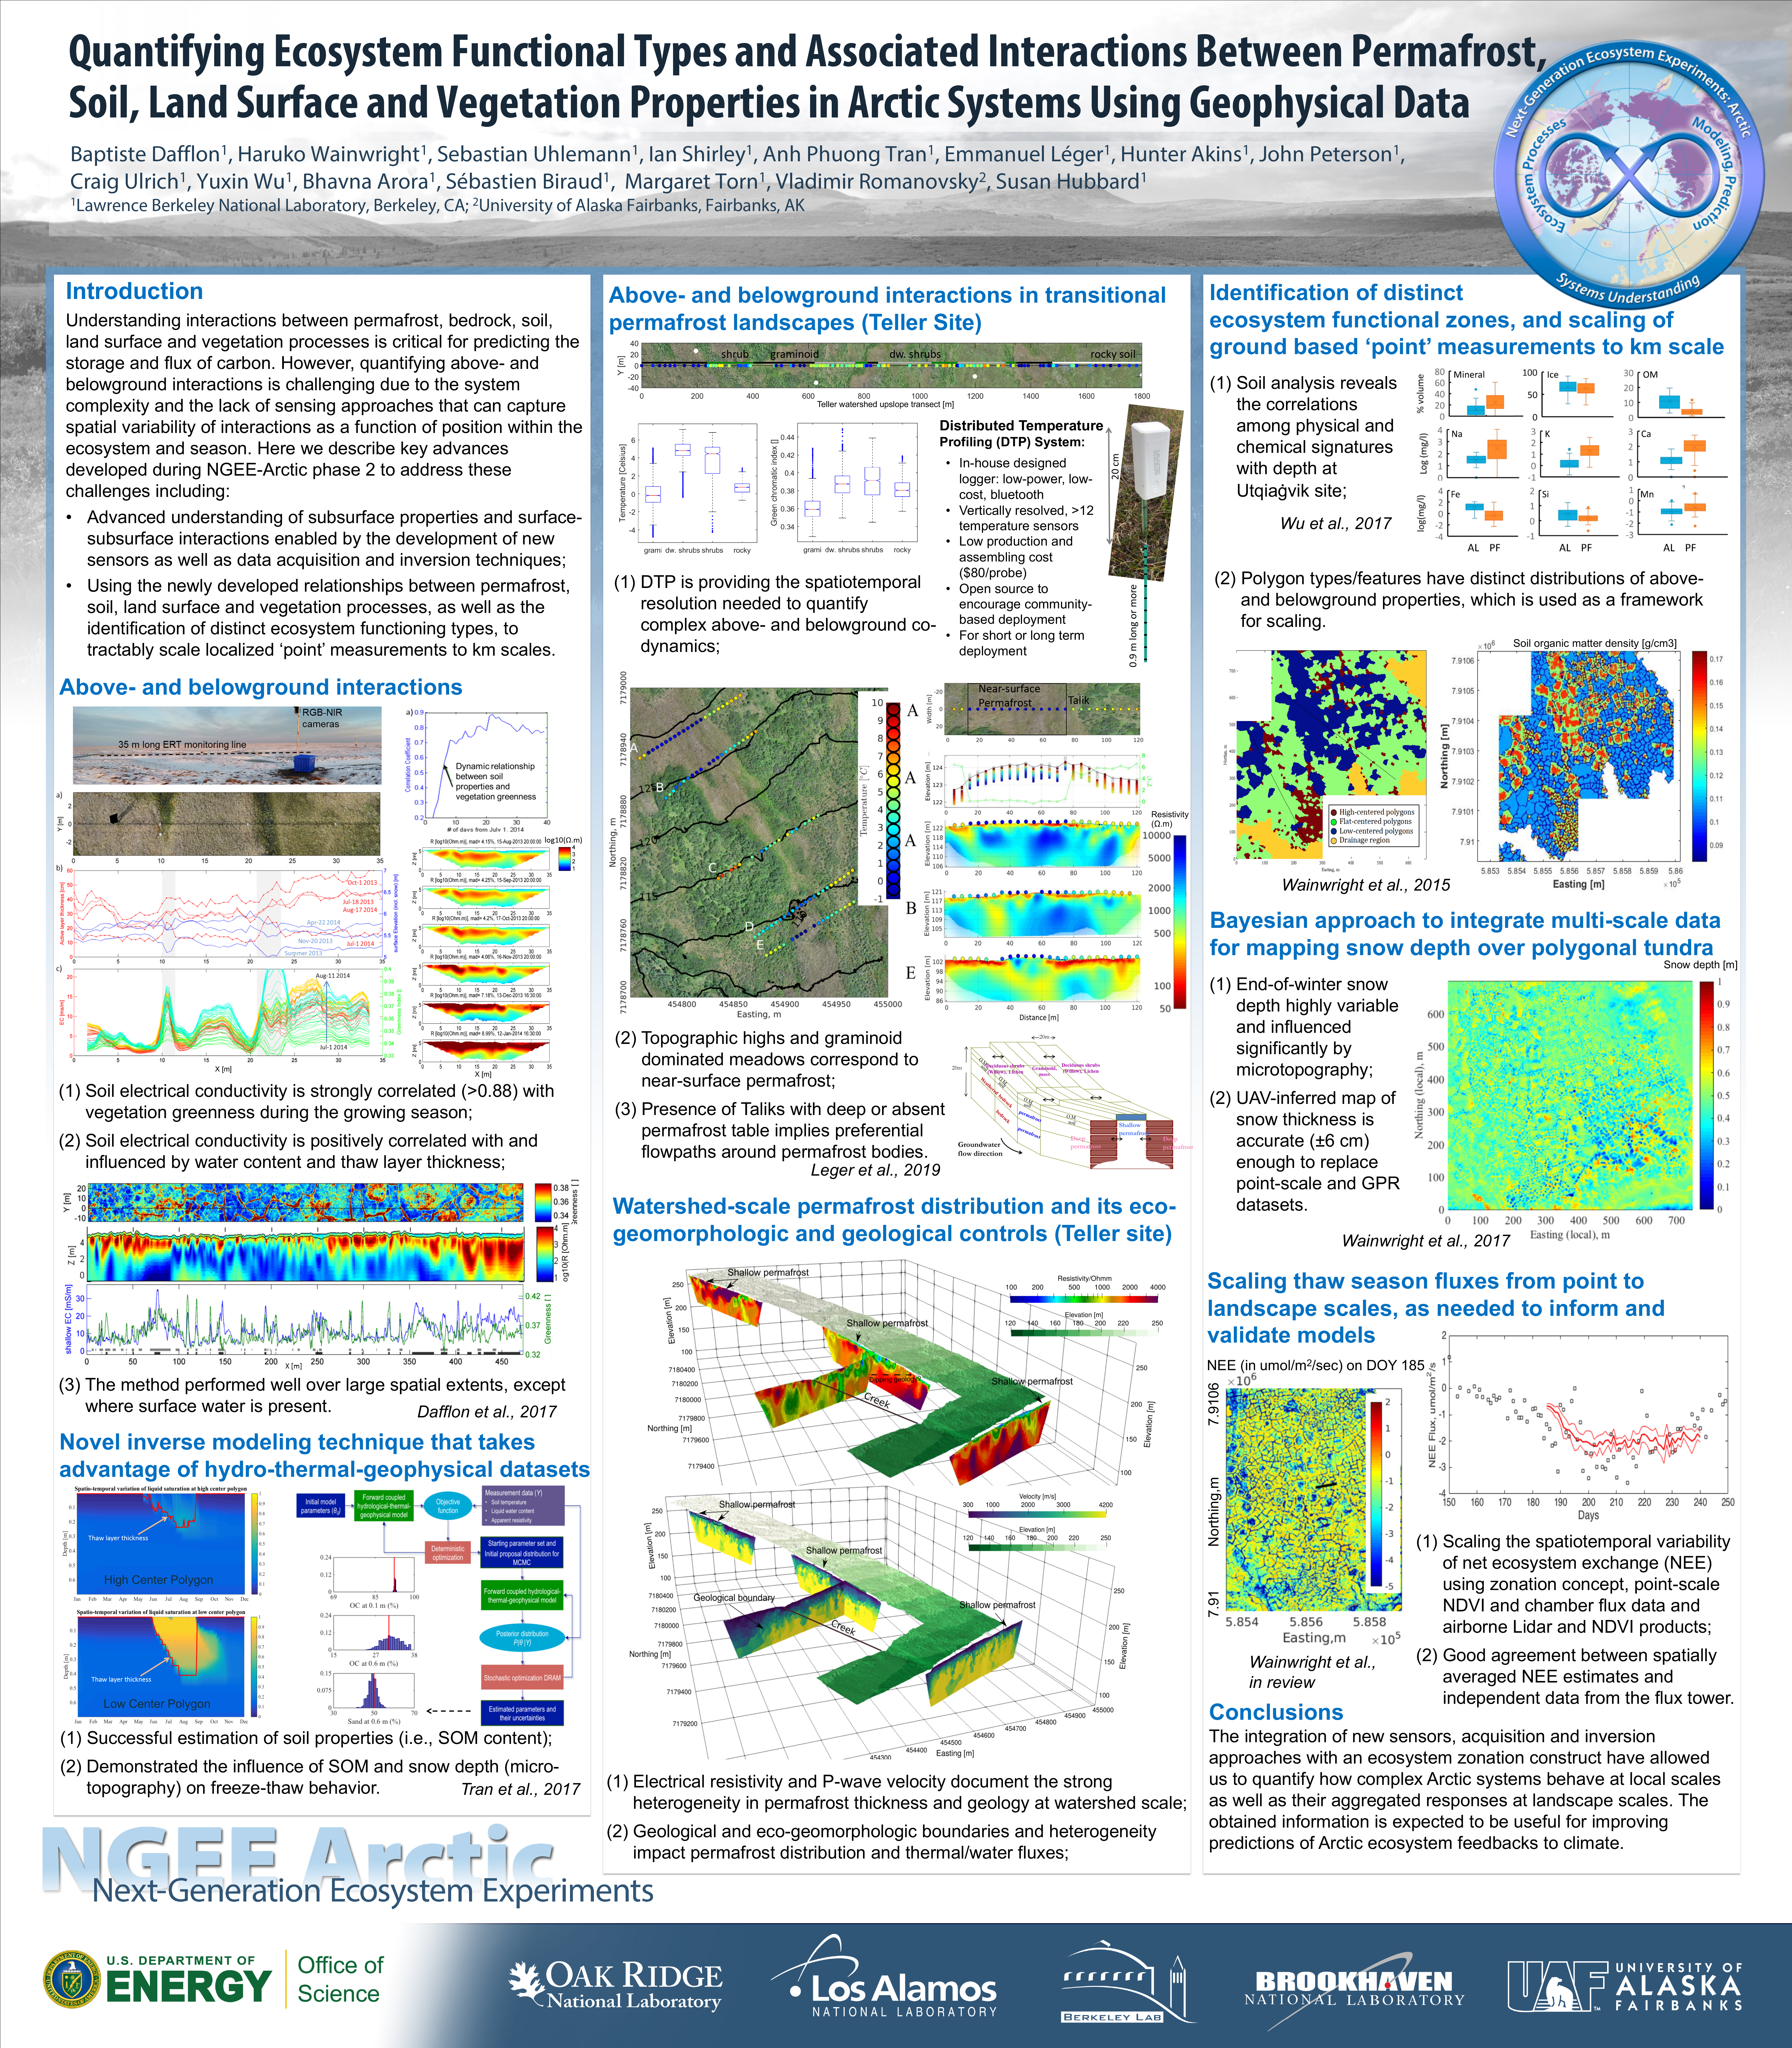 Quantifying Ecosystem Functional Types and Associated Interactions between Permafrost, Soil, Land Surface and Vegetation Properties in Arctic Systems Using Geophysical Data poster